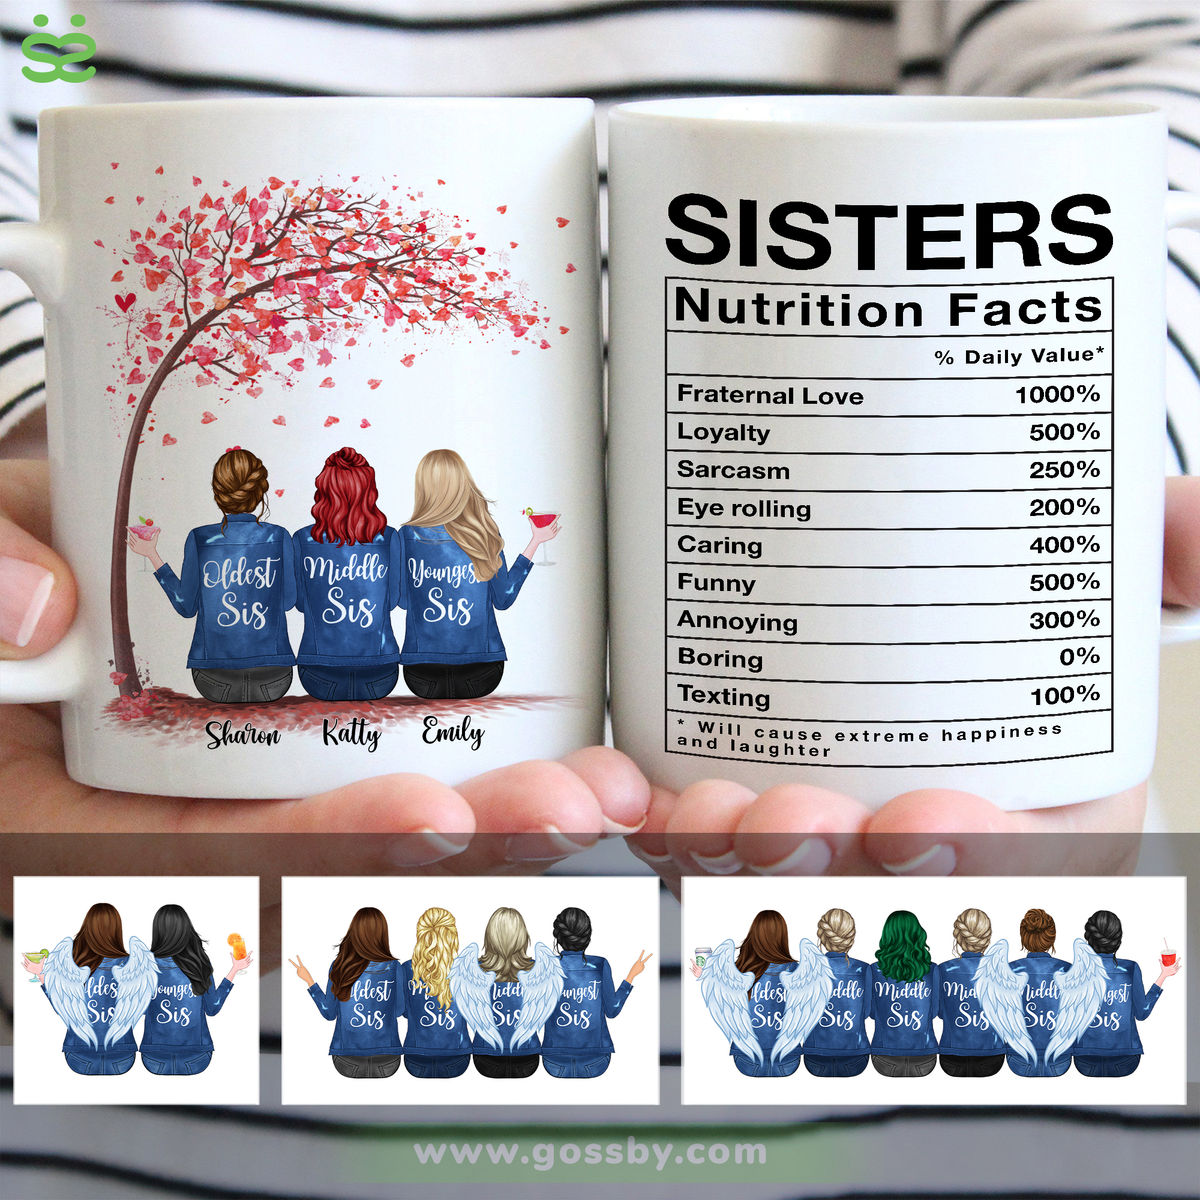 Personalized Mug - Sisters - Sisters Nutrition Fact (6227)